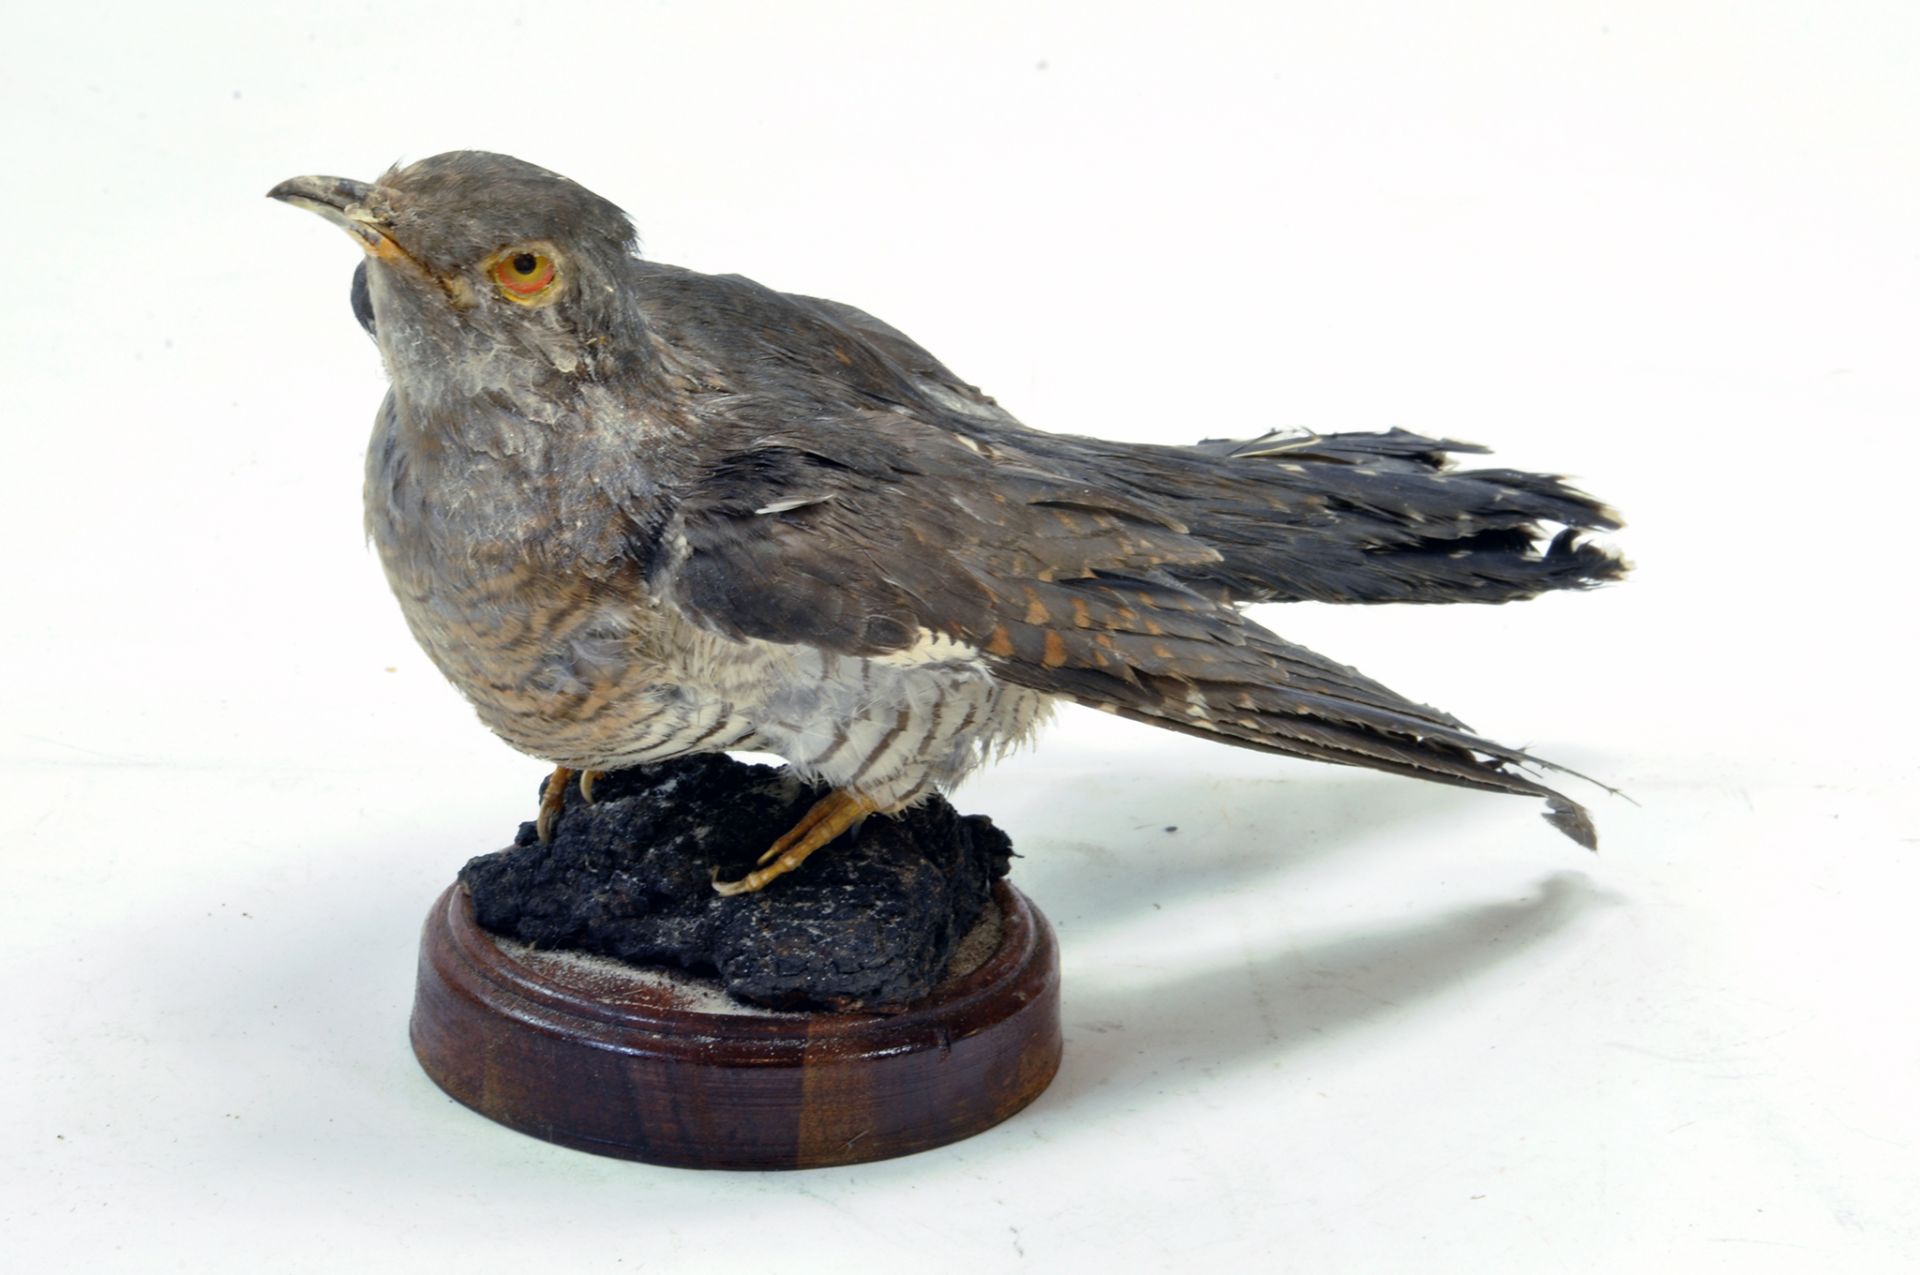 Taxidermy: An early 21st century example of a Cuckoo (Cuculus canorus), mounted on a Rock based